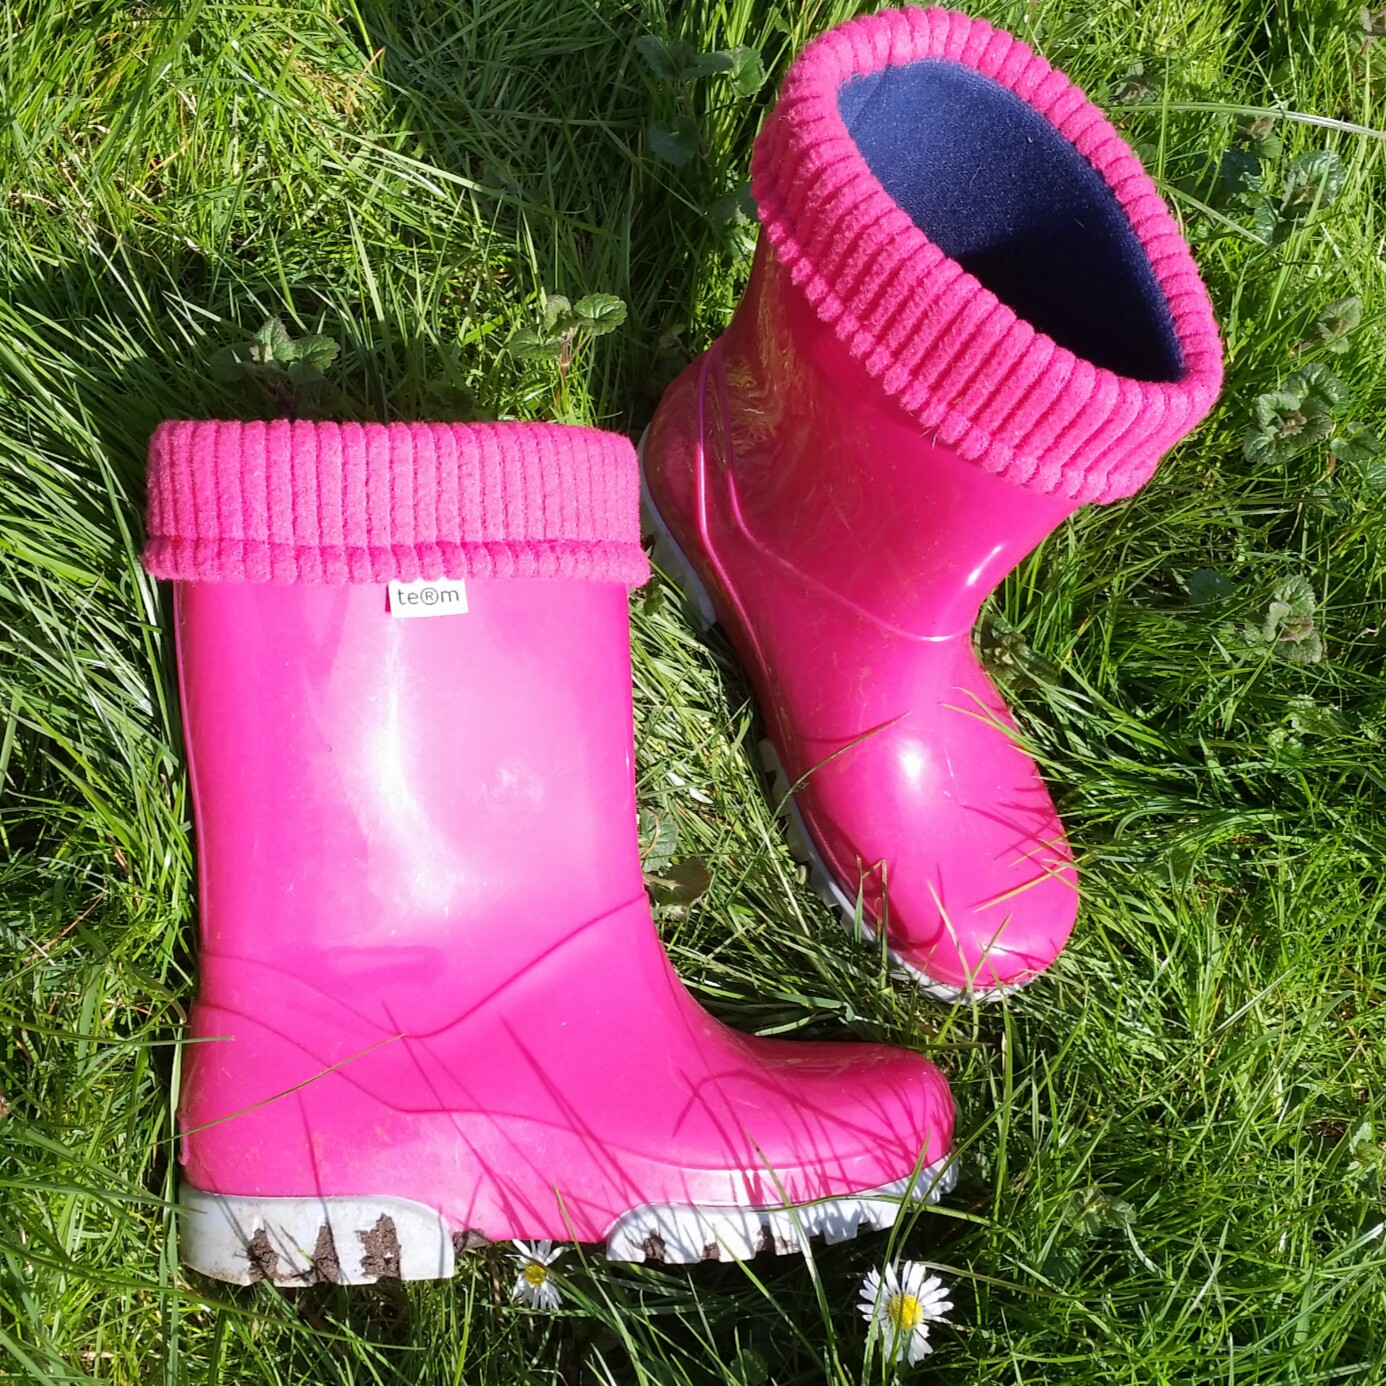 Term wellies, footwear, outdoors, review, Living Life Our Way, get outside, #LivingLifeWild